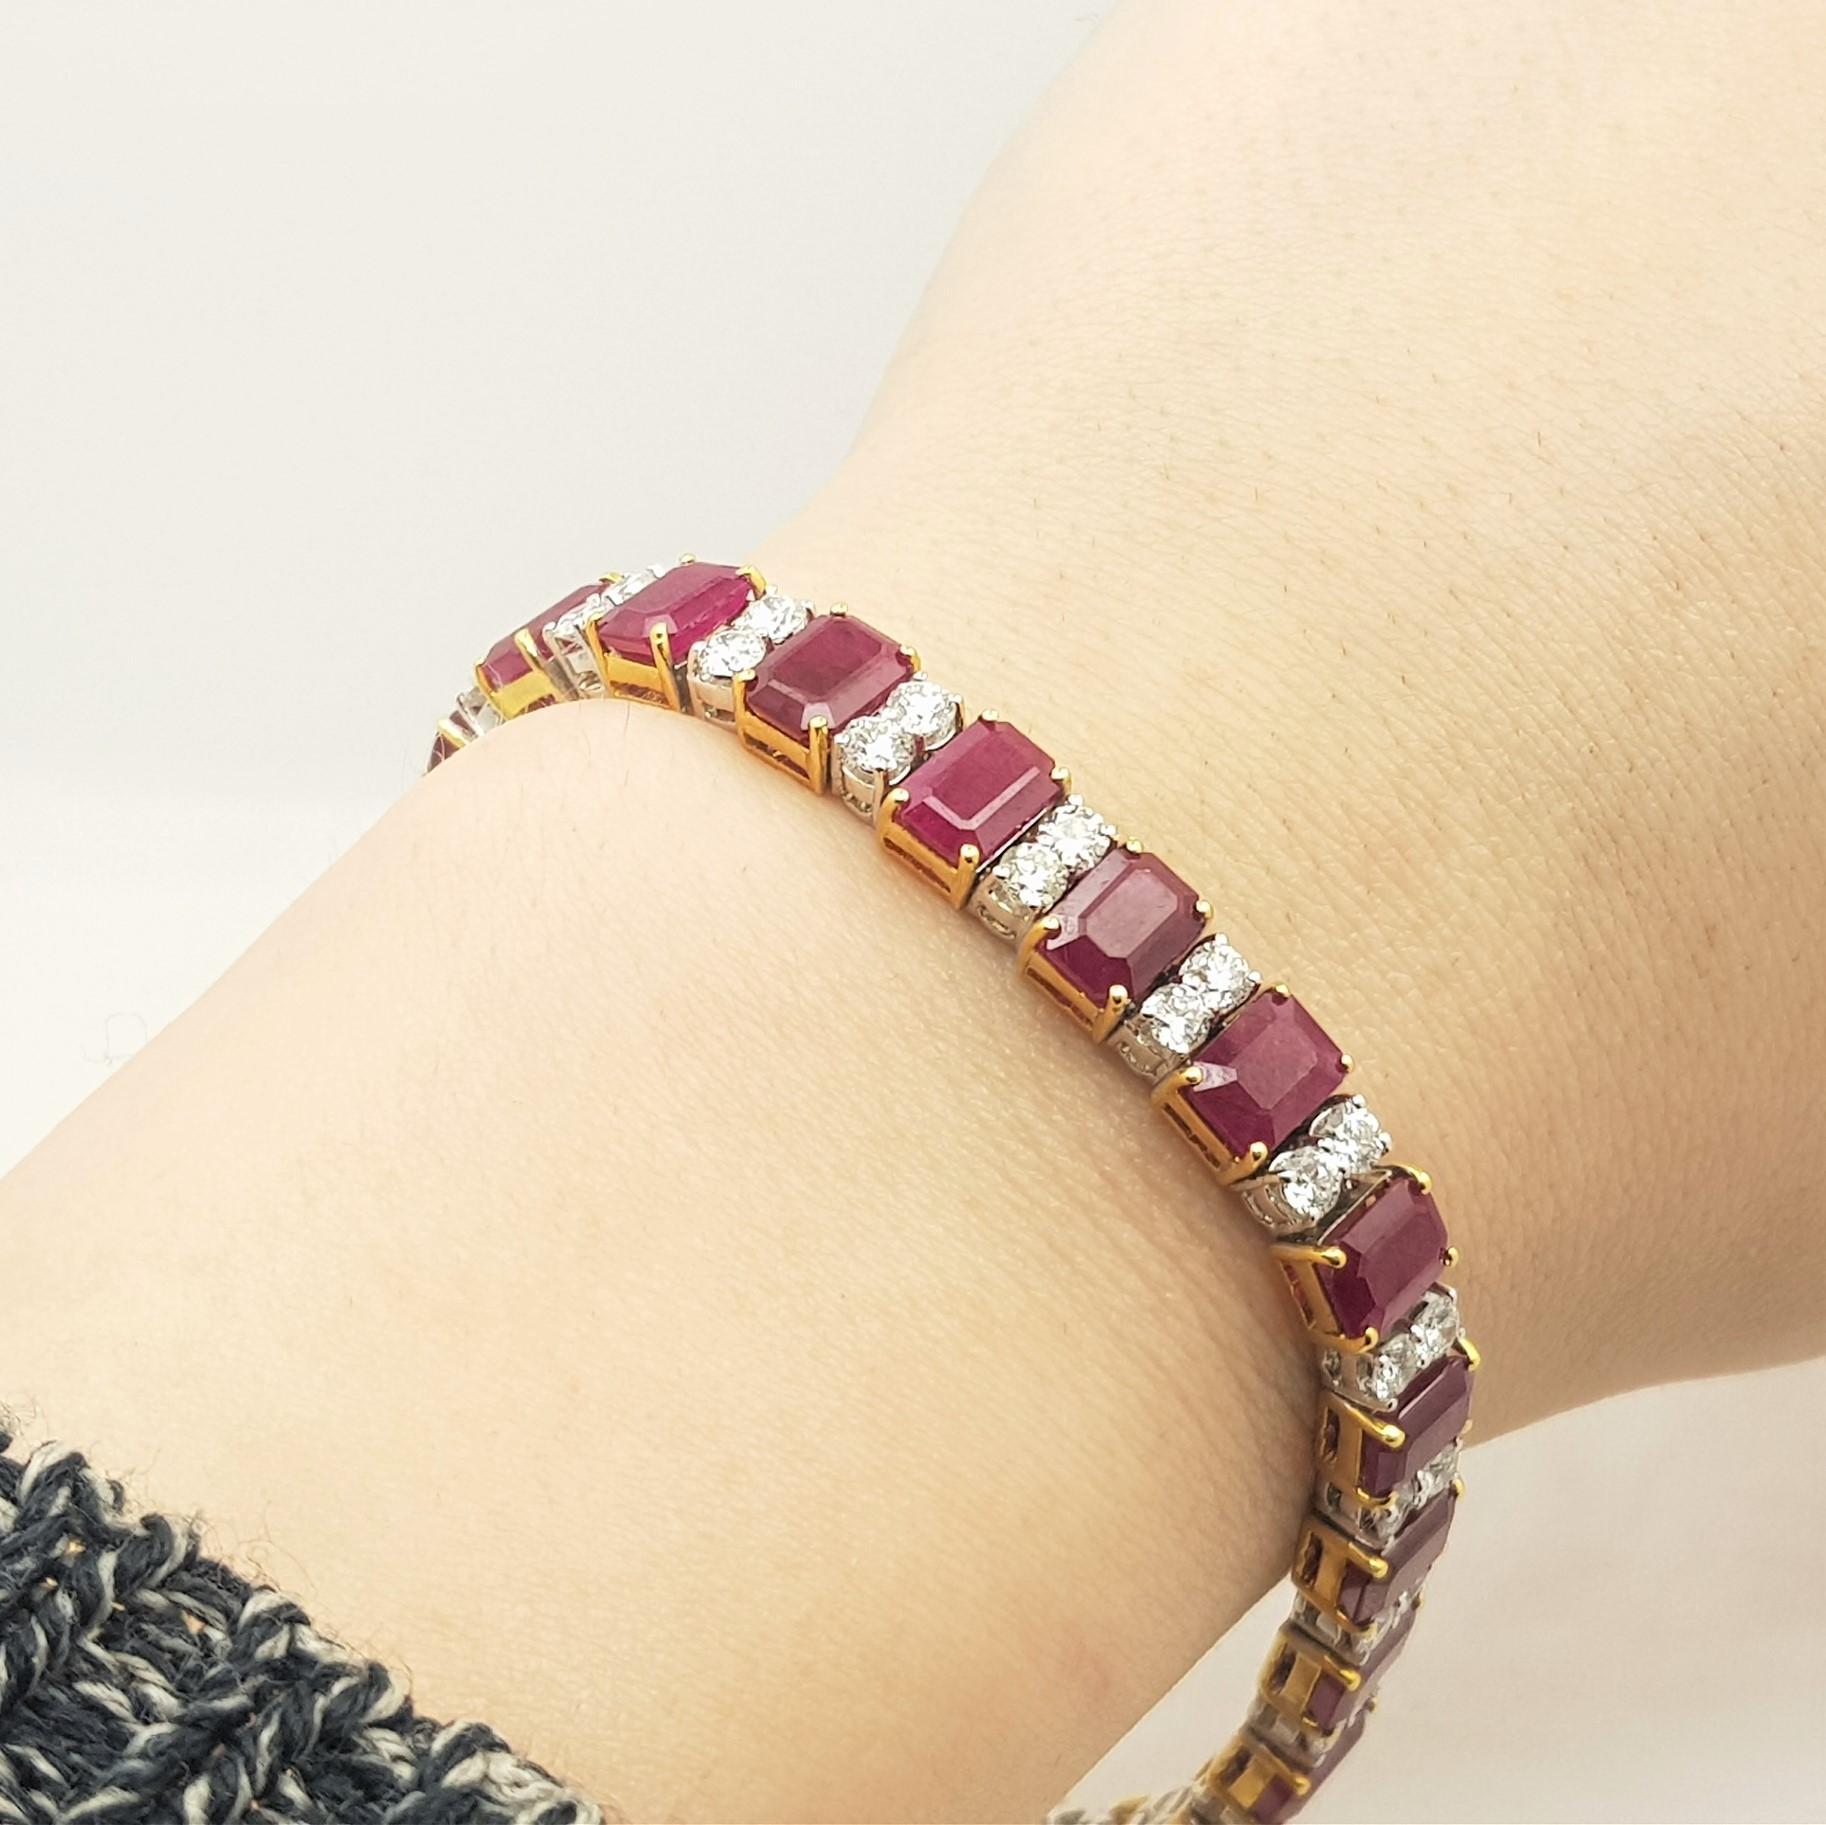 18ct Two Tone Gold Burmese Ruby & 4.5ct TW Diamond Bracelet Val $62765 AUD

This incredible bracelet contains 22 beautiful Burmese Rubies alongside 4.5ct of diamonds and has been valued at $62,765 AUD

This item has a valuation so please check it